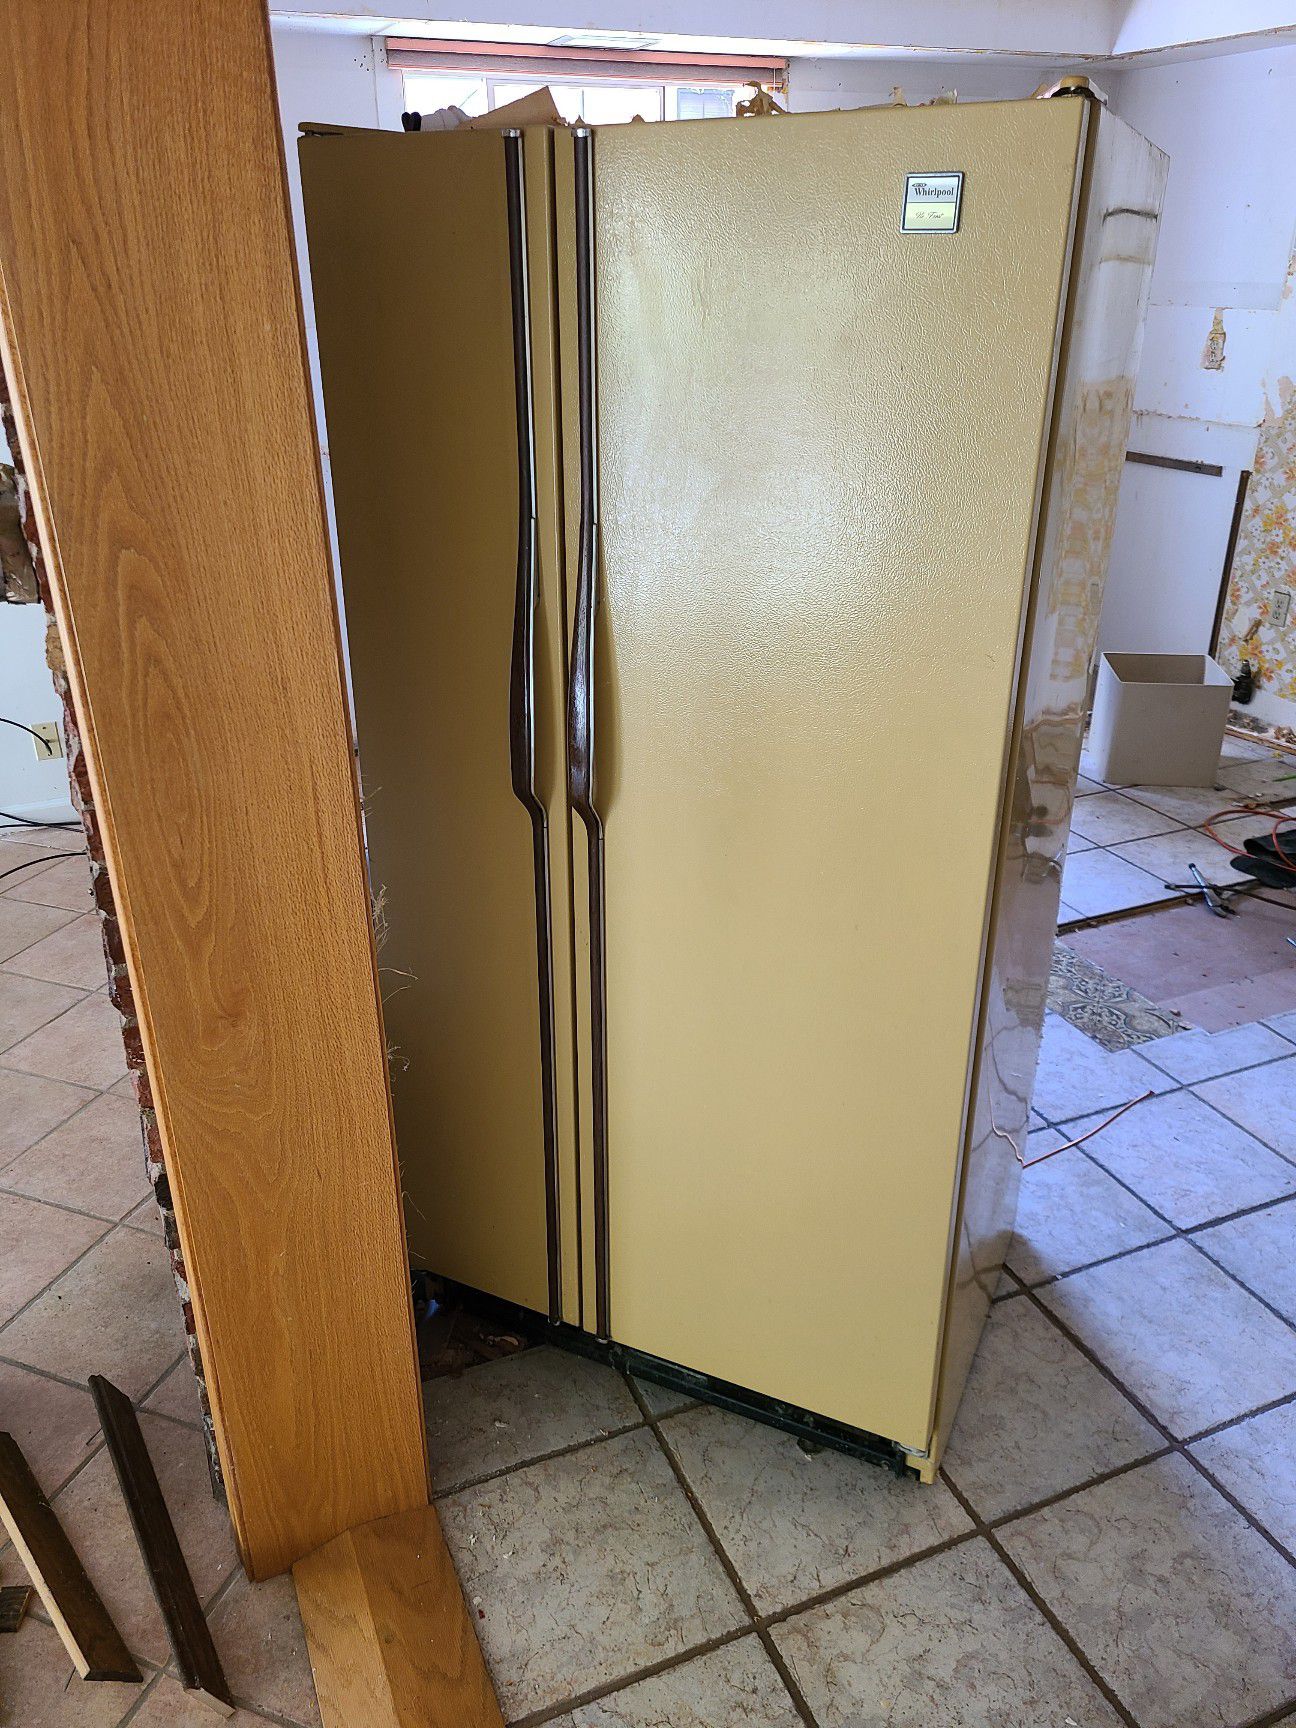 Kenmore stove,dish washer,whirlpool side by side refrigerator